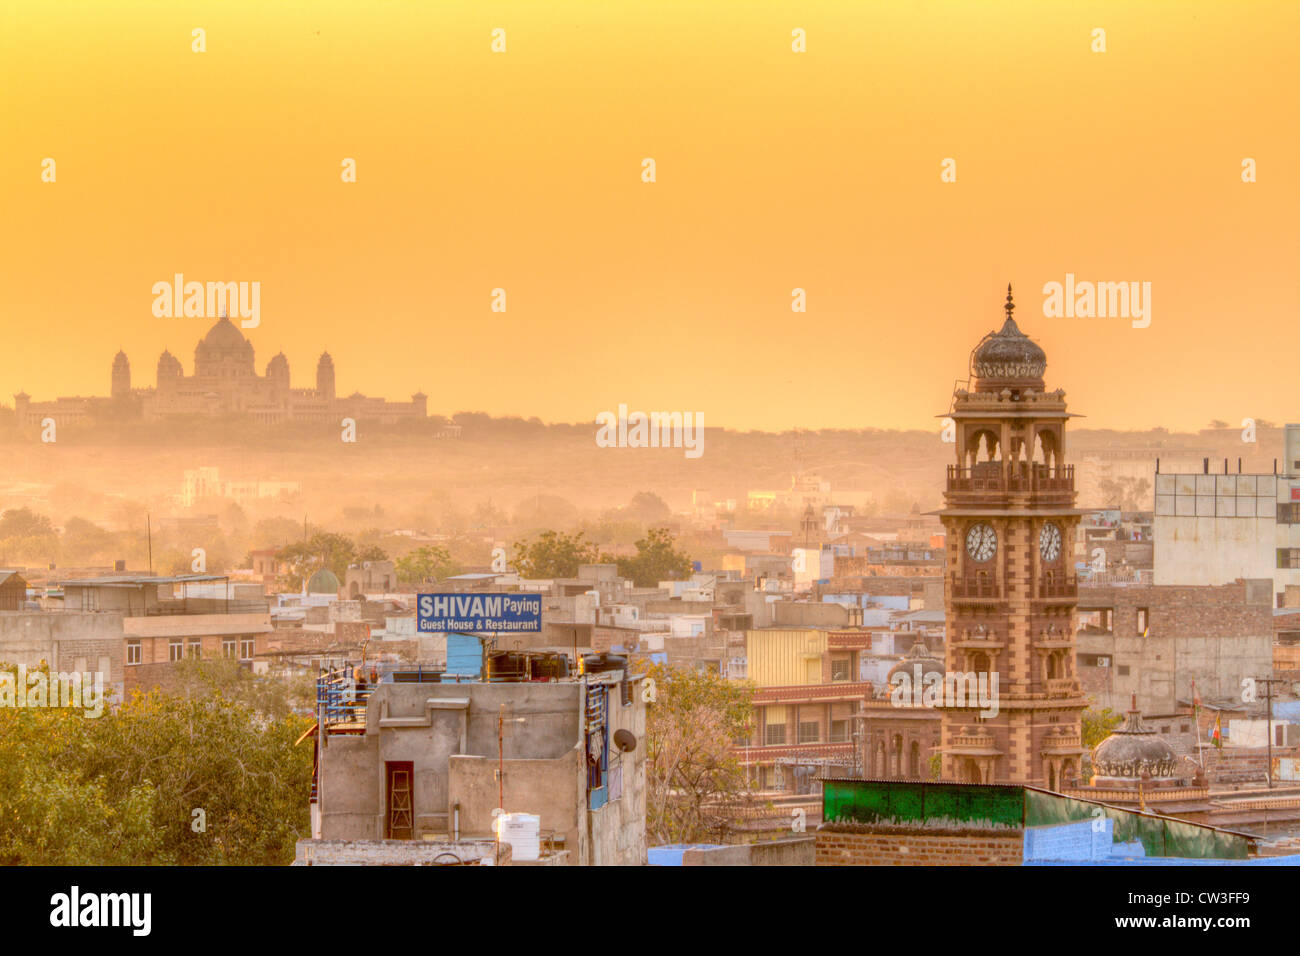 Clock tower and Mosque at dawn in Jodhpur. Stock Photo